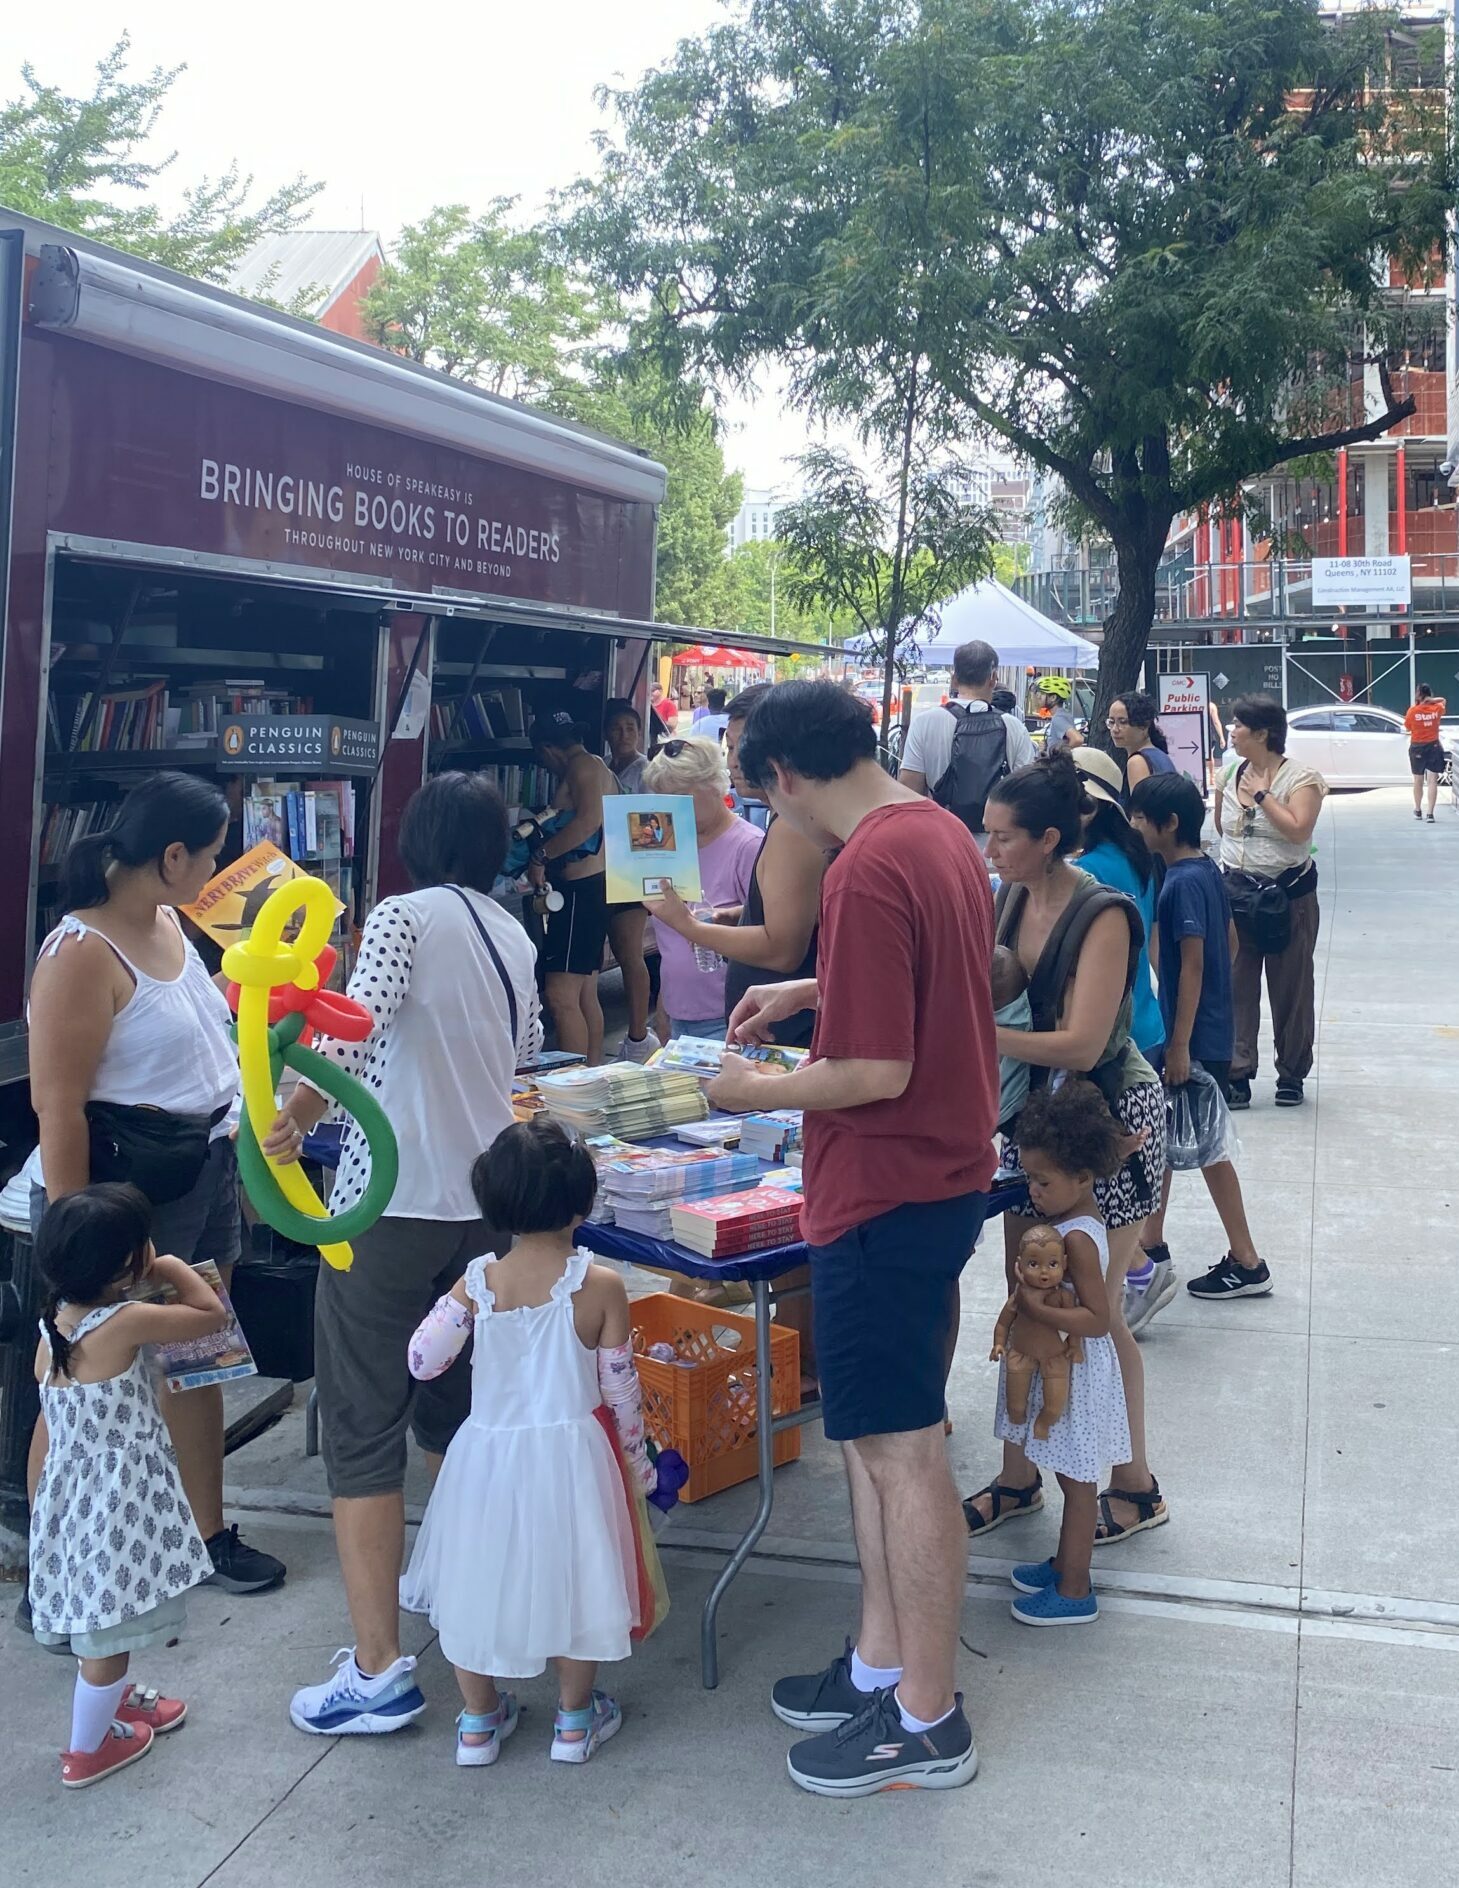 House of SpeakEasy's Bookmobile, parked on a sunny street behind a rack of bikes. A crowd of people is gathered by the Bookmobile's shelves, choosing their books.